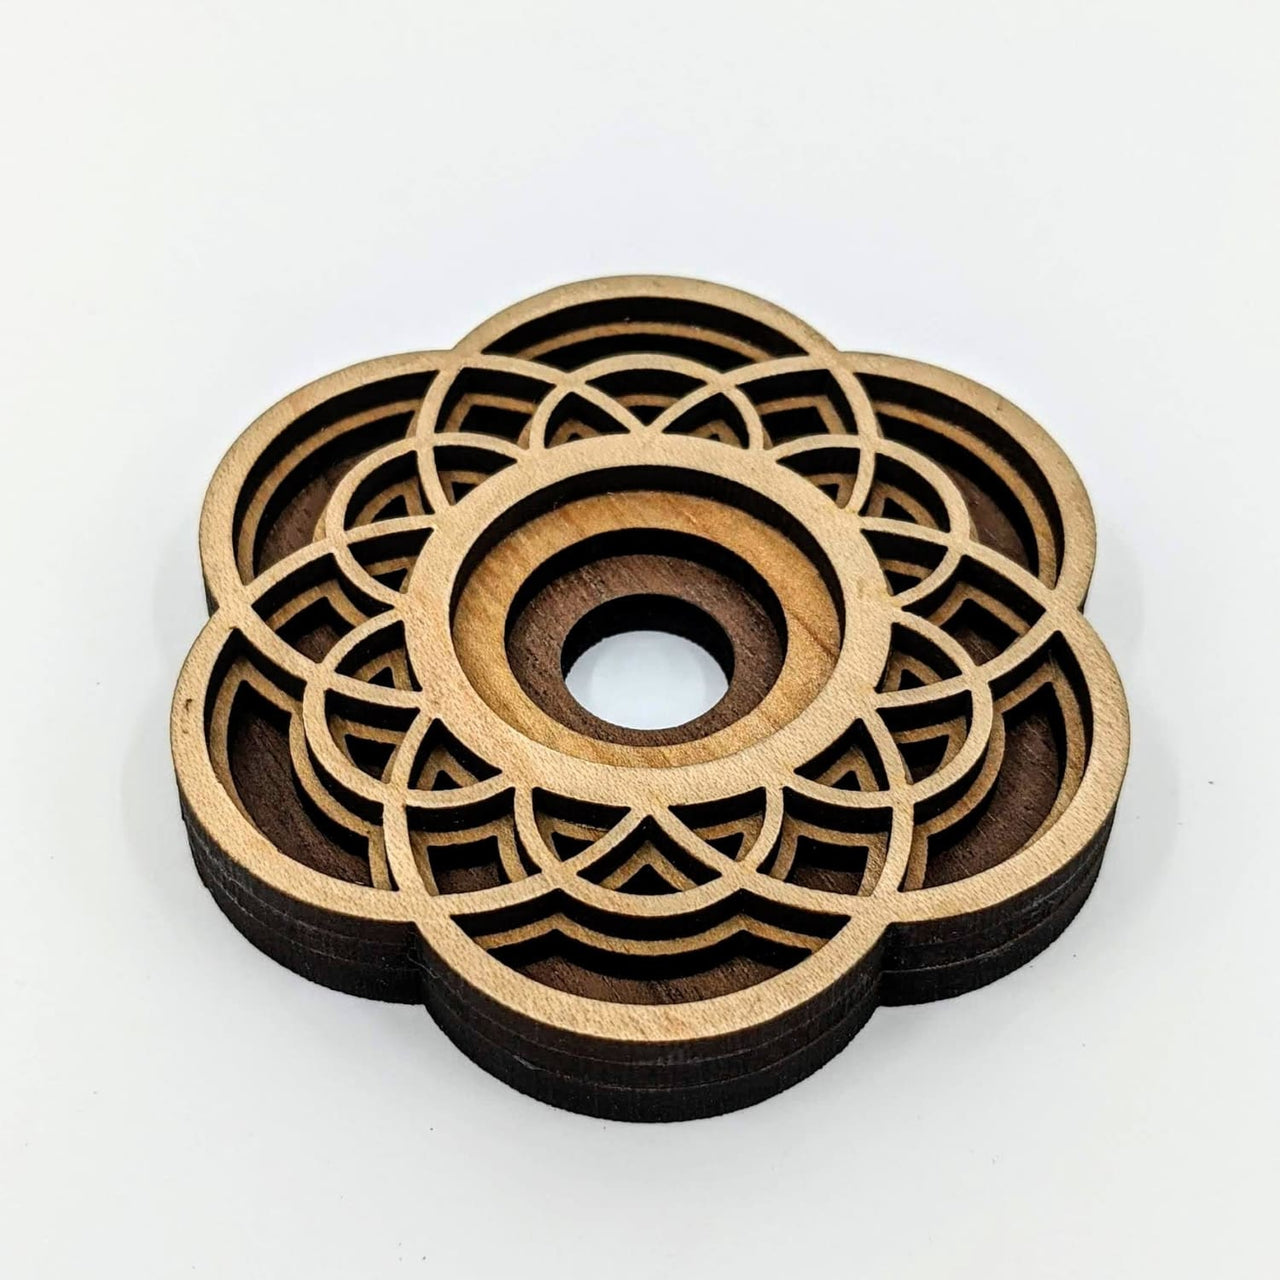 Laser Cut Sphere Stand Seed of Life (26g) #SK7603 - $24